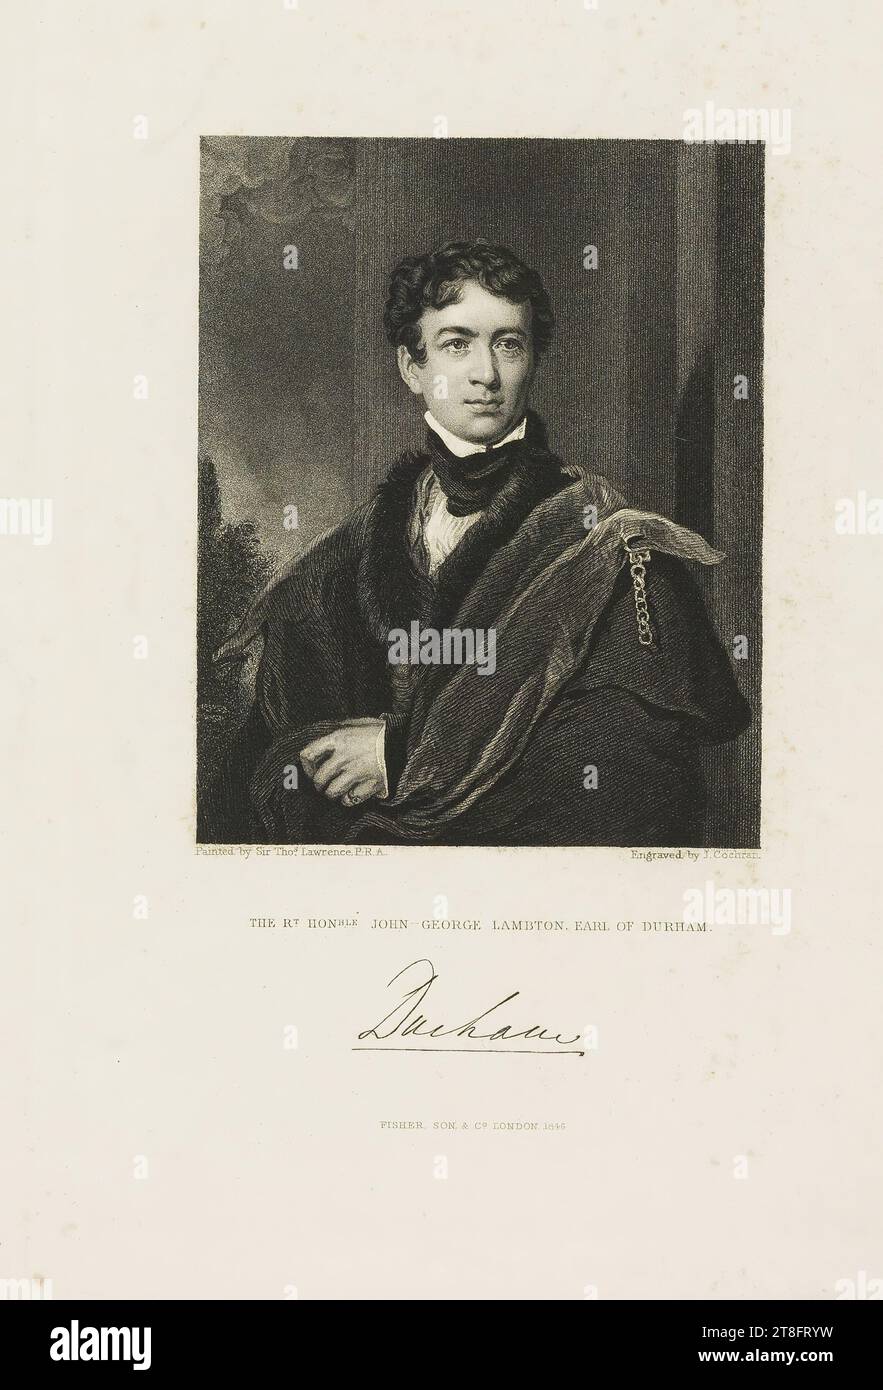 Painted by Sir Tho.s Lawrence P.R.A. Engraved by J. Cochran. THE R.T HON.BLE JOHN-GEORGE LAMBTON. EARL OF DURHAM. Durham. FISHER, SON & CO LONDON 1836 Stock Photo